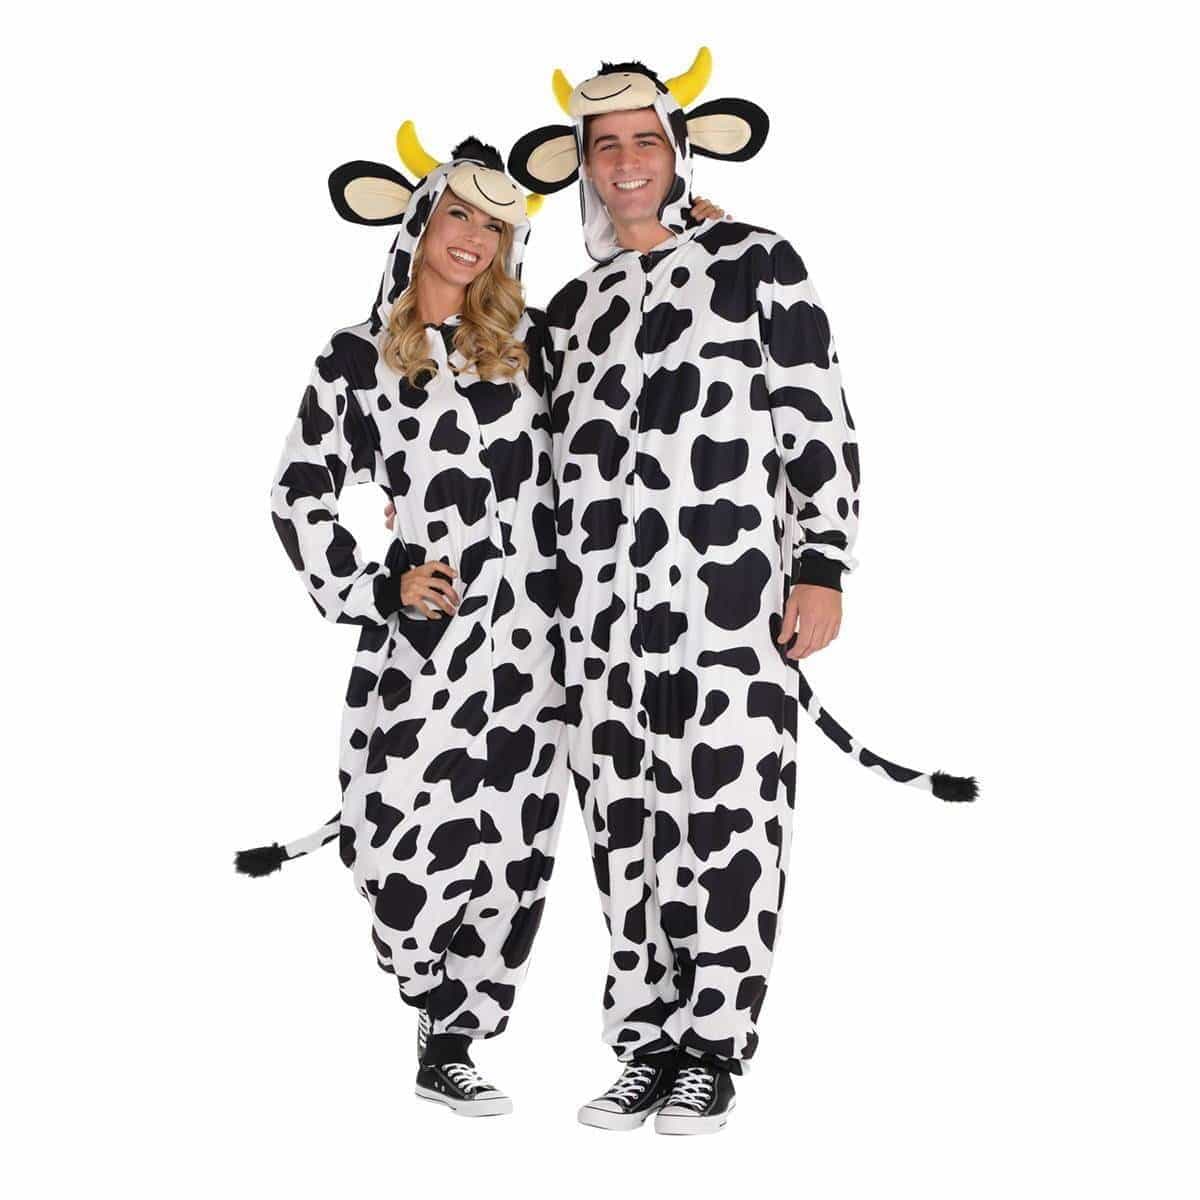 Buy Costumes Cow Zipster for Plus Size Adults sold at Party Expert